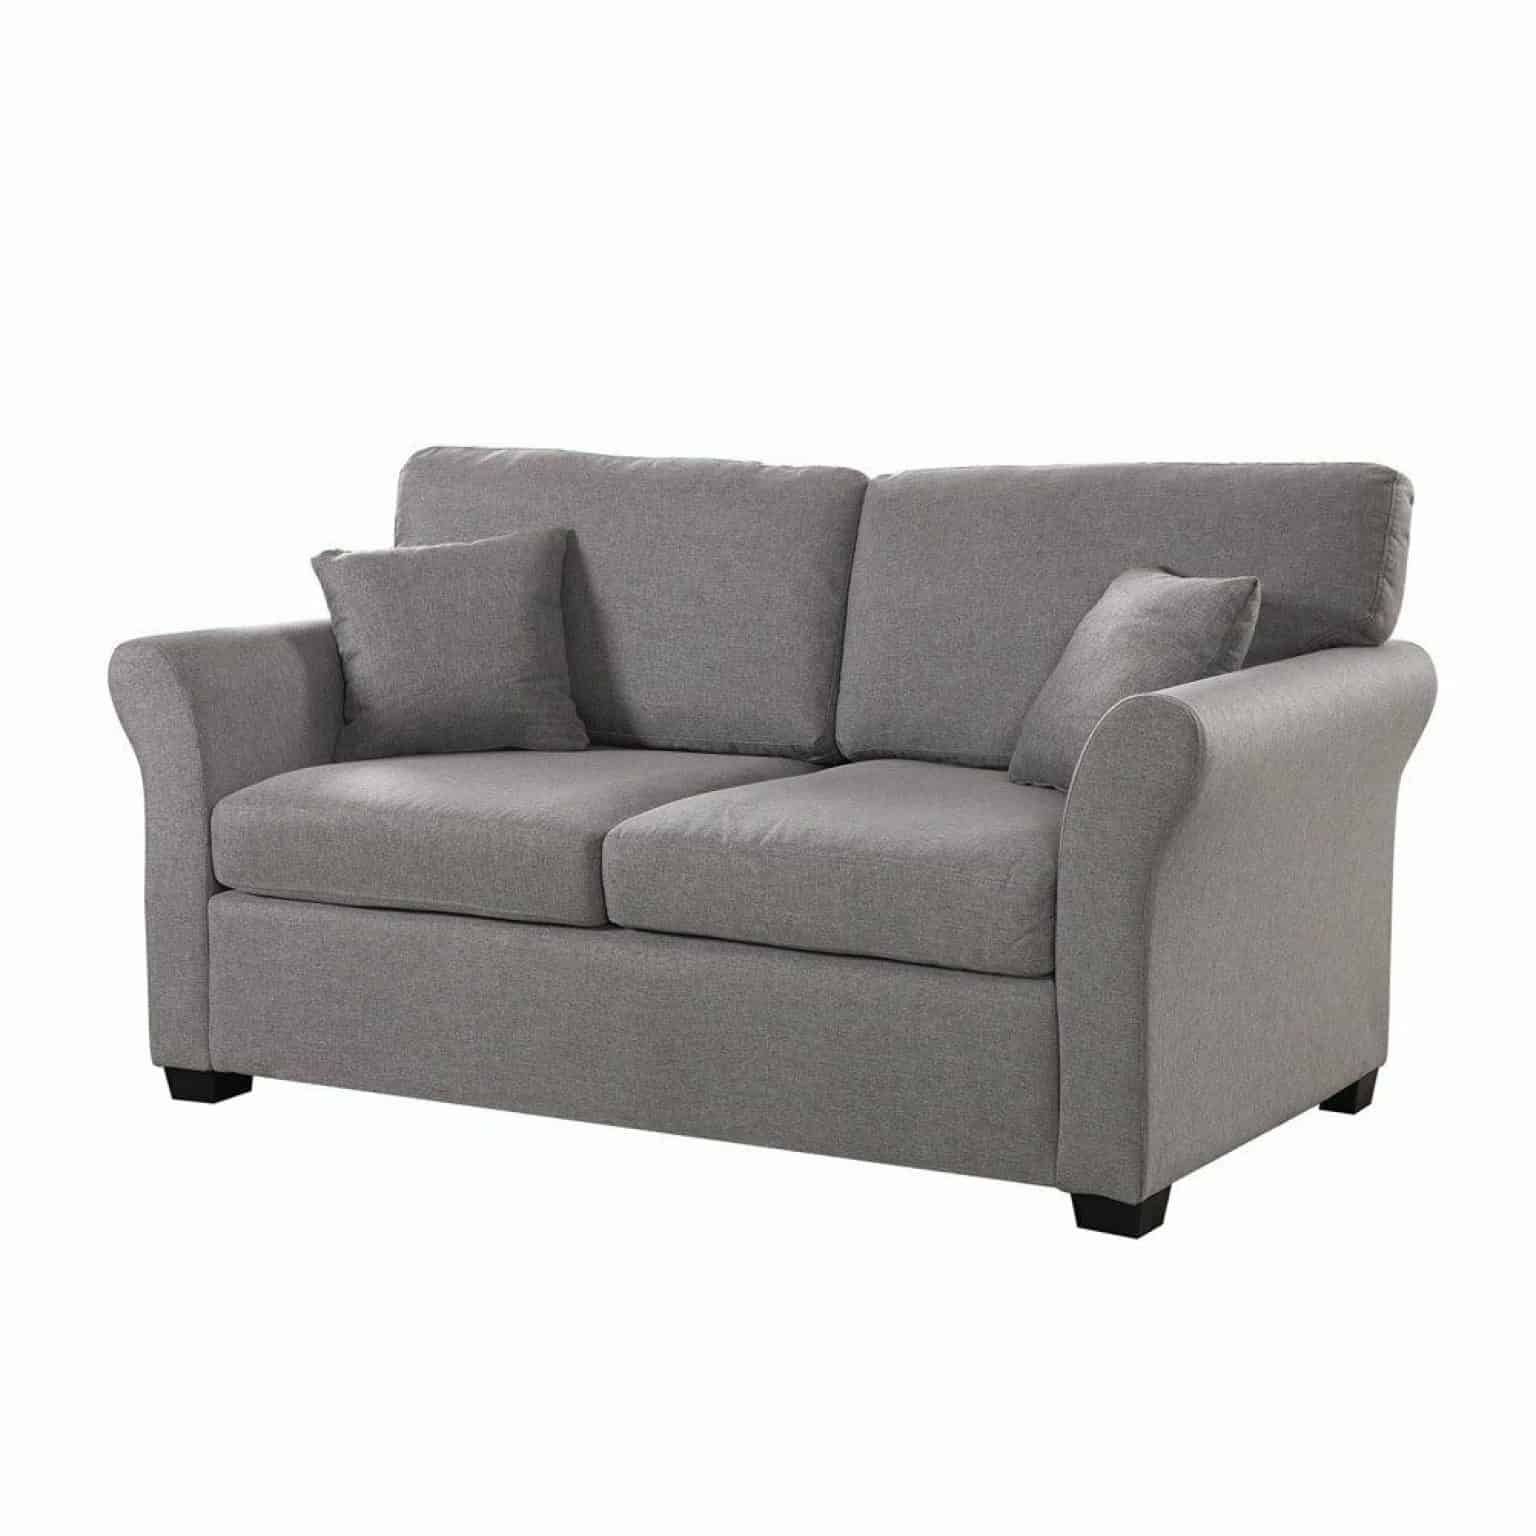 63" Bluish Grey Cozy Loveseat Sofa W/ 2 Accent Pillows – Affordable Inside Most Current Sofas In Bluish Grey (View 4 of 15)